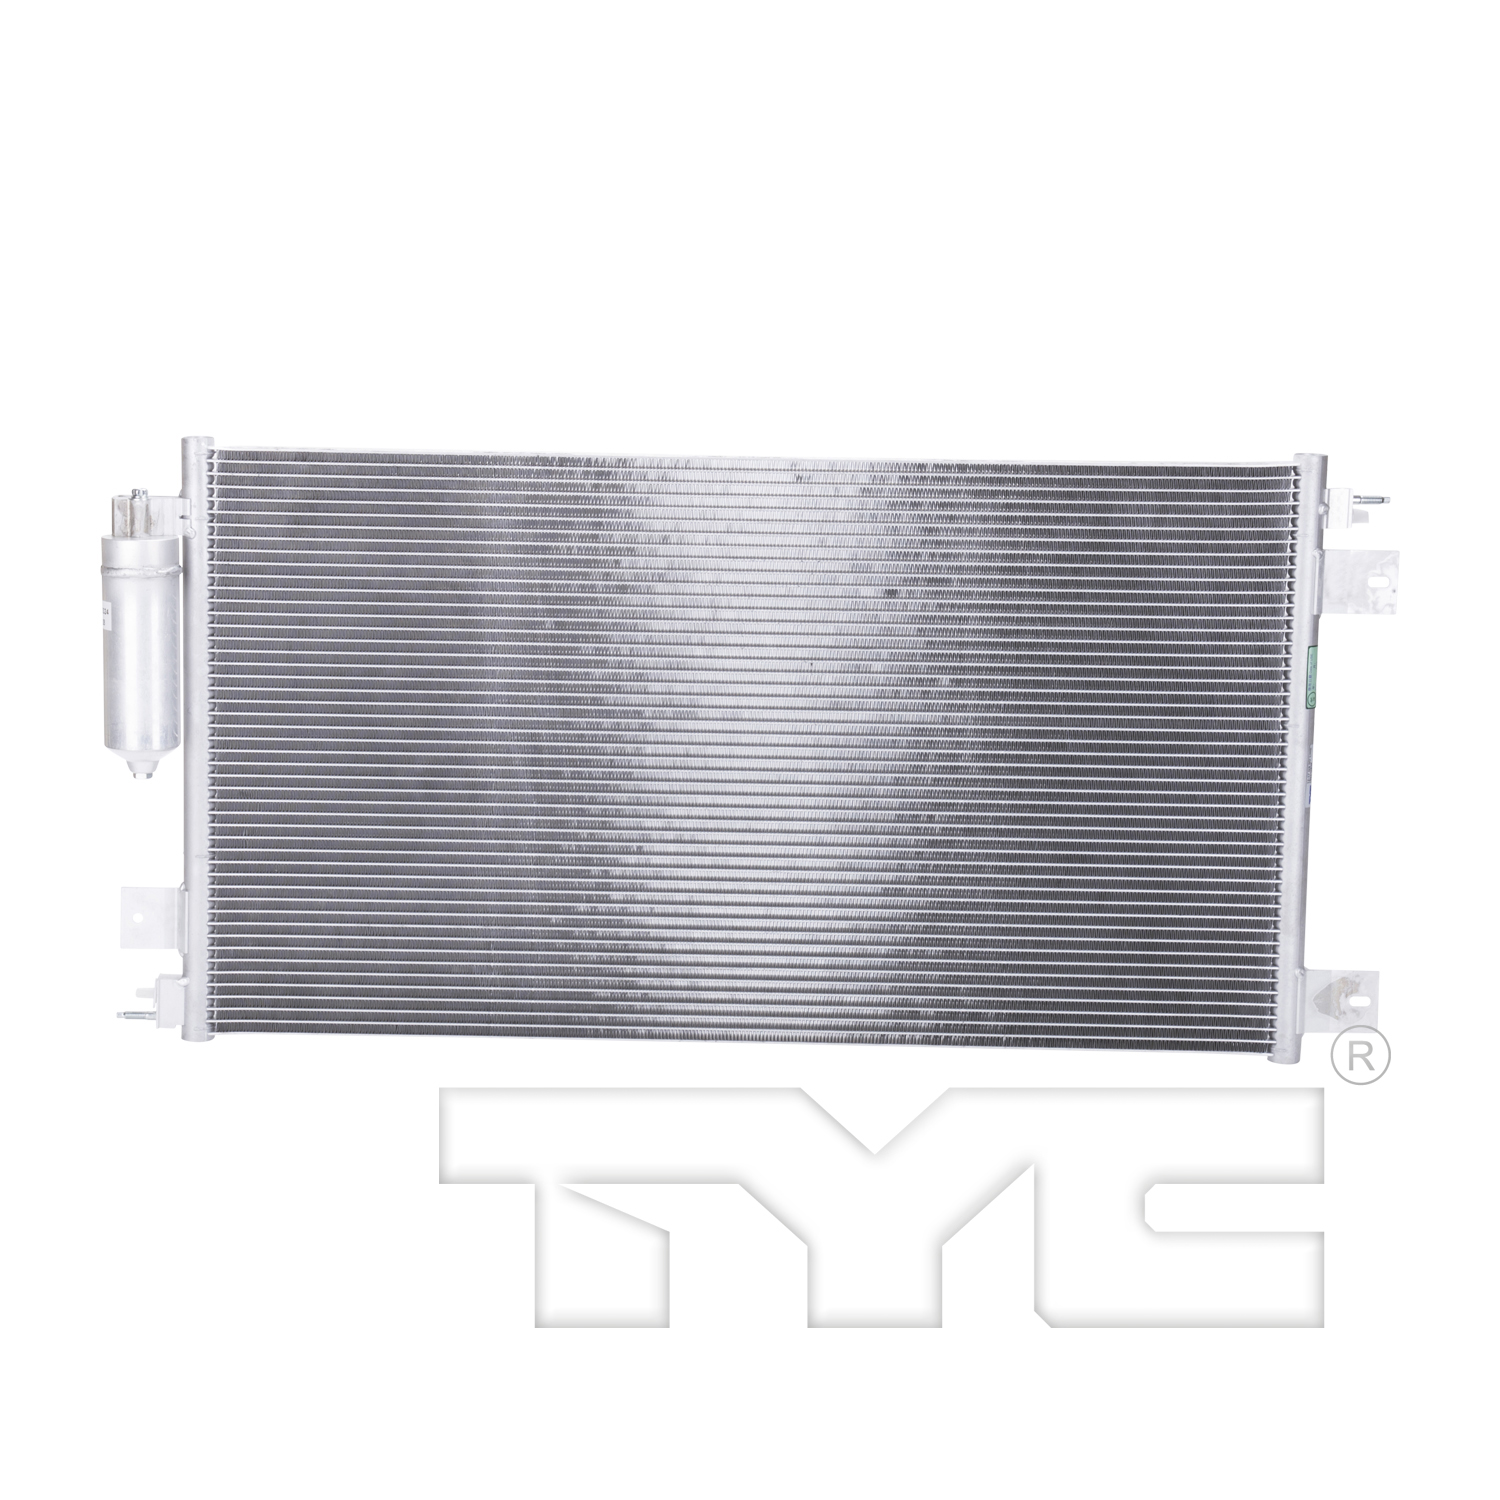 Aftermarket AC CONDENSERS for NISSAN - NV3500, NV3500,12-21,Air conditioning condenser